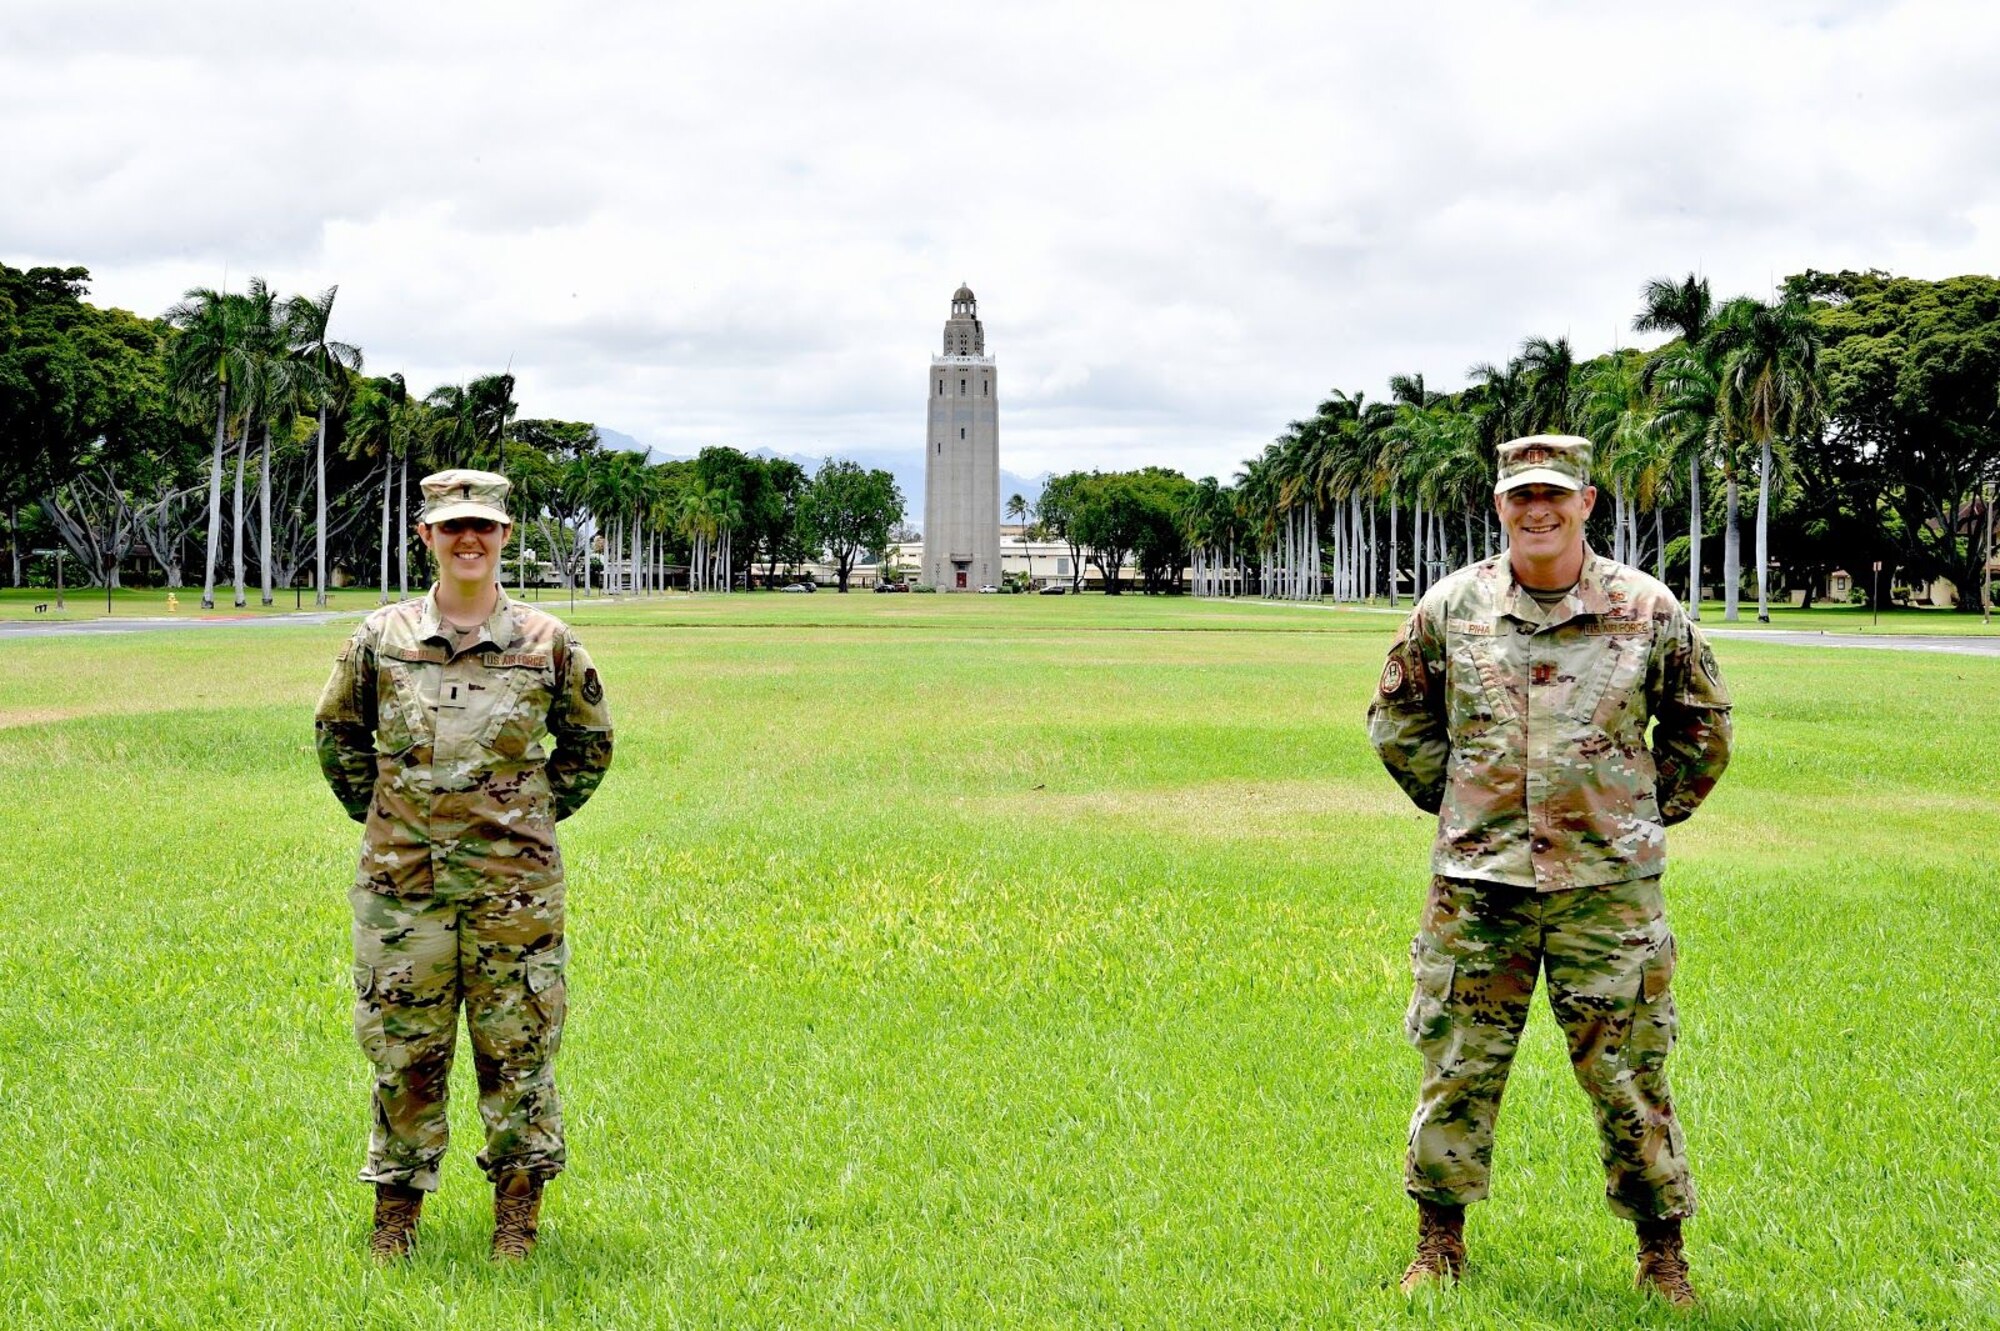 First Lt. Arielle Heald, 15th Wing Legal Office assistant staff advocate, and Capt. Christopher Piha, Pacific Air Forces weapons system support branch chief, along with U.S. Army Spc. Cantrell, not pictured, rendered first aid to a Honolulu Police officer who was involved in a motorcycle crash at Joint Base Pearl Harbor-Hickam, Hawaii, July 9, 2020. The officer is recovering from her injuries. (U.S. Air Force photo by 2nd Lt. Benjamin Aronson)